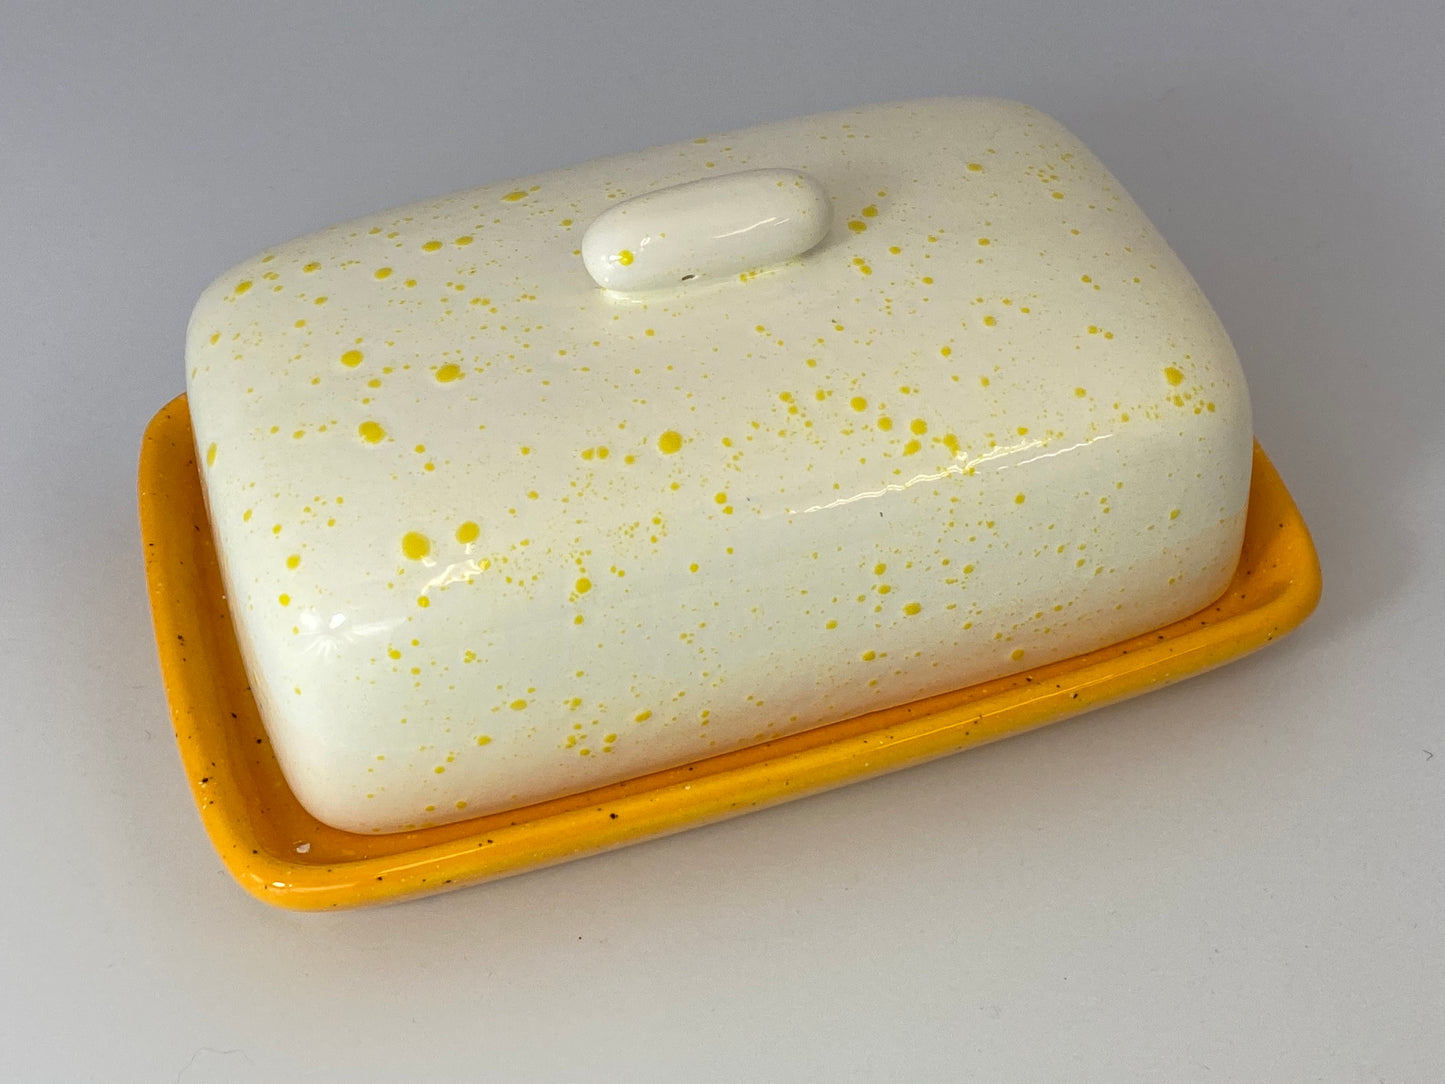 Butter Dish with White Lid Yellow Spots - PeterBowenArt